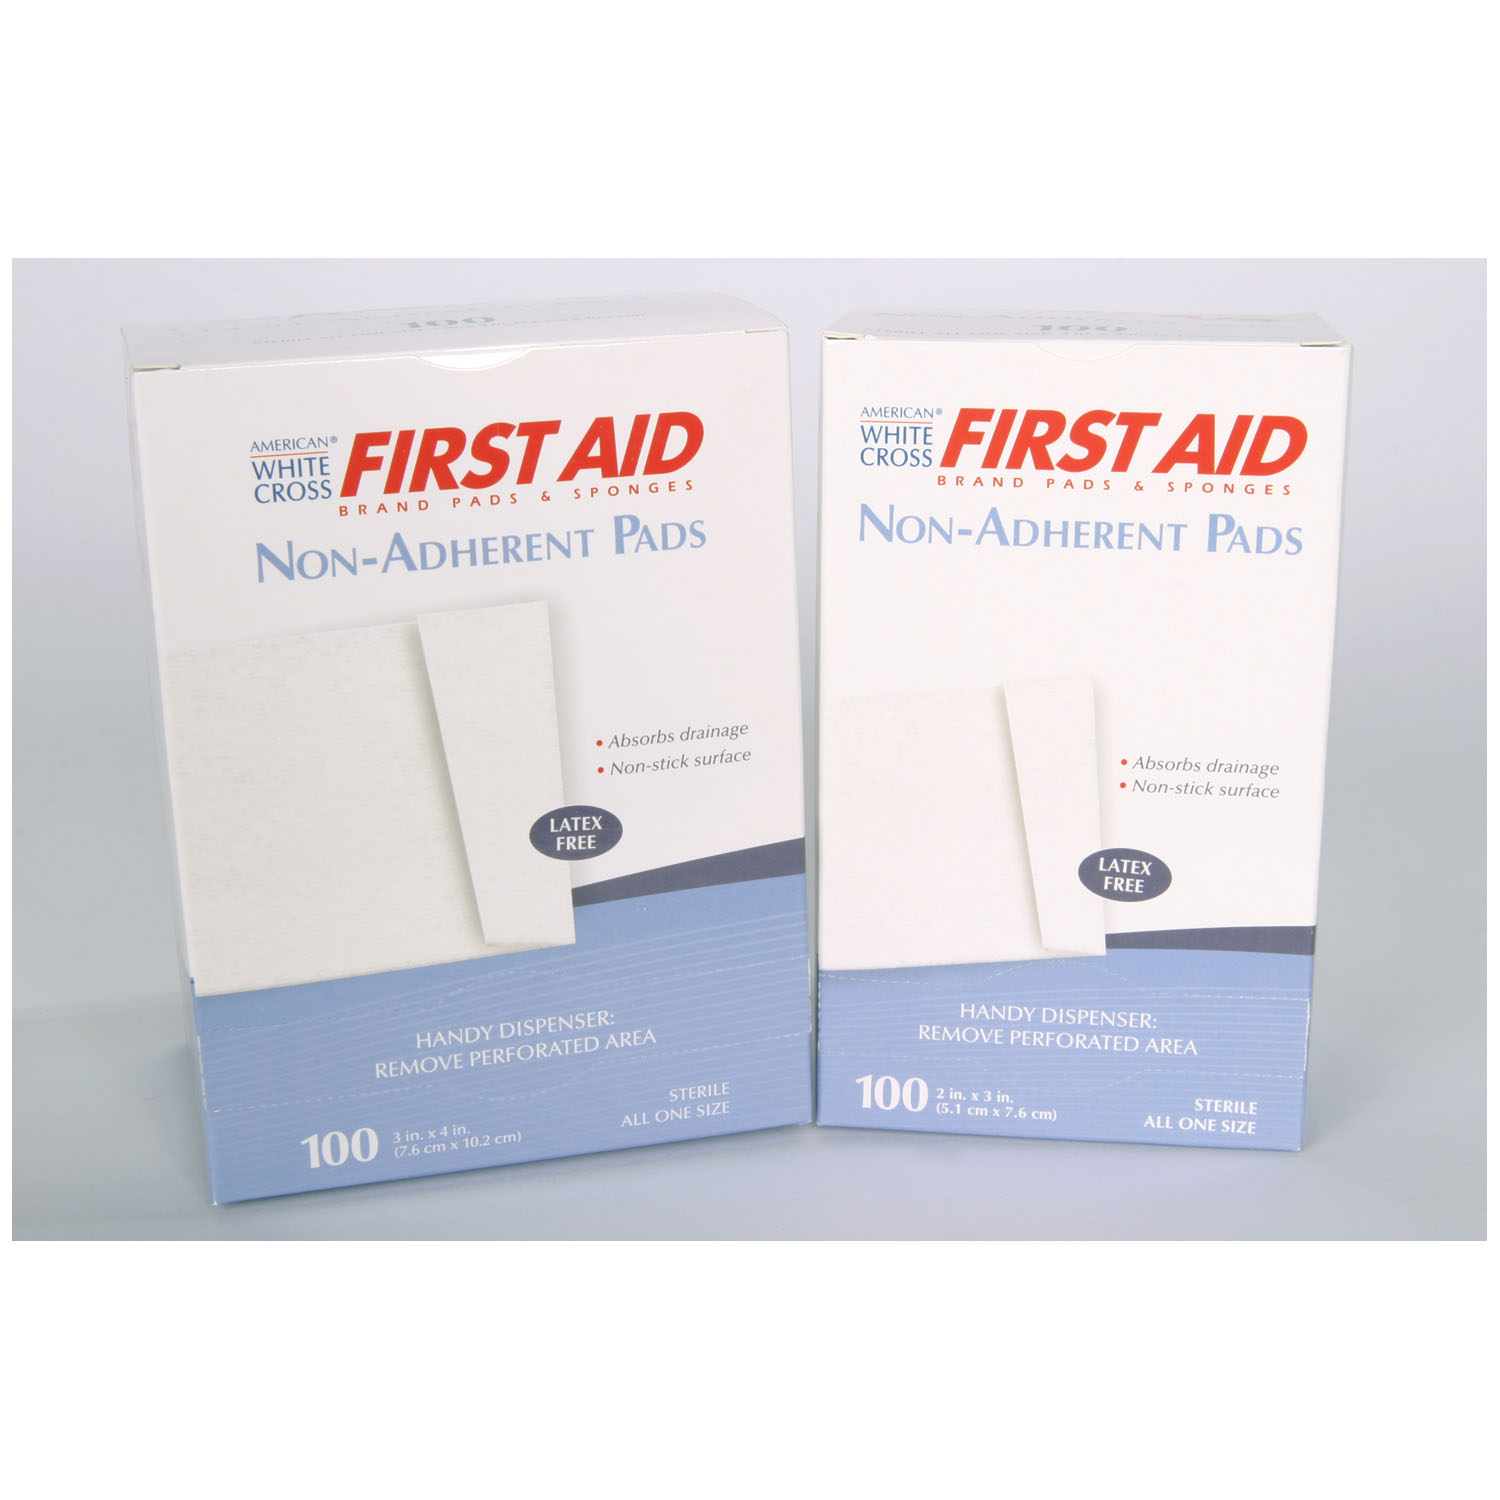 DUKAL NON-ADHERENT STERILE PADS : 7565033 BX $7.78 Stocked